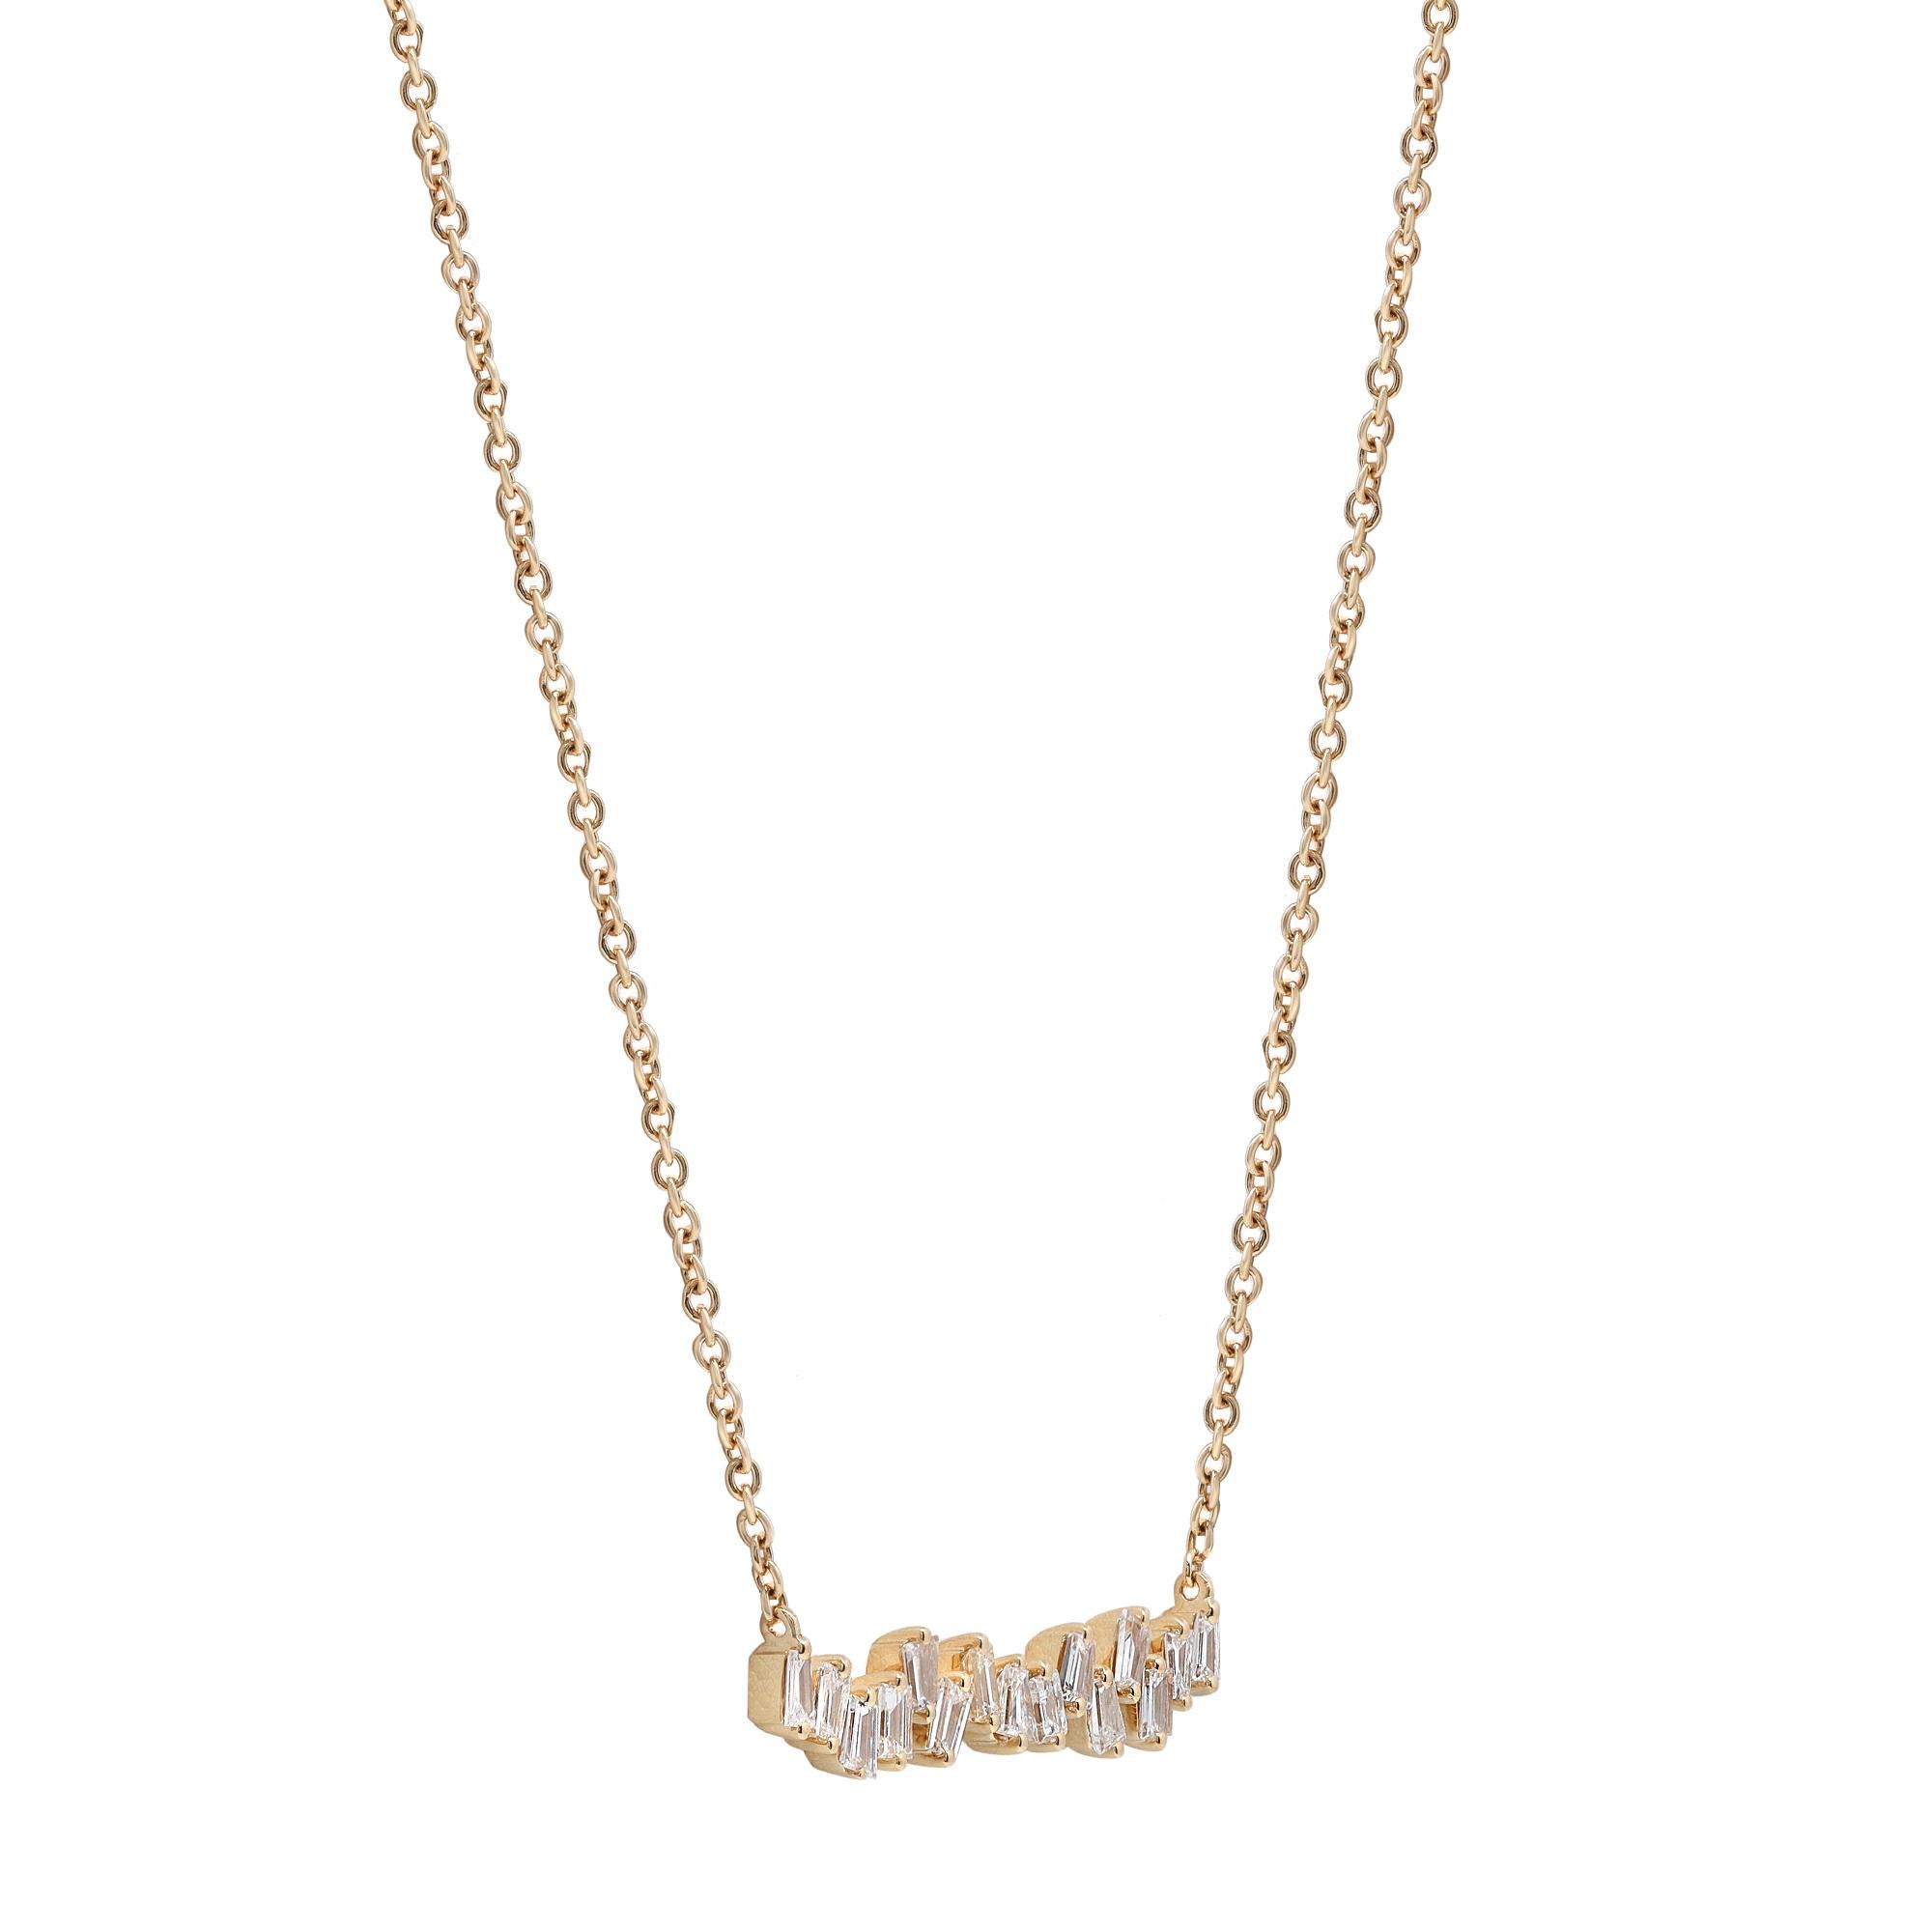 Lead the way with this alluring diamond cluster bar necklace for her, crafted in 18K yellow gold and encrusted with 1.02 carat of shimmering baguette cut diamonds. Diamond color G and VS-SI clarity. Bar size: 32.3 mm. Chain length: 18 inches. Total